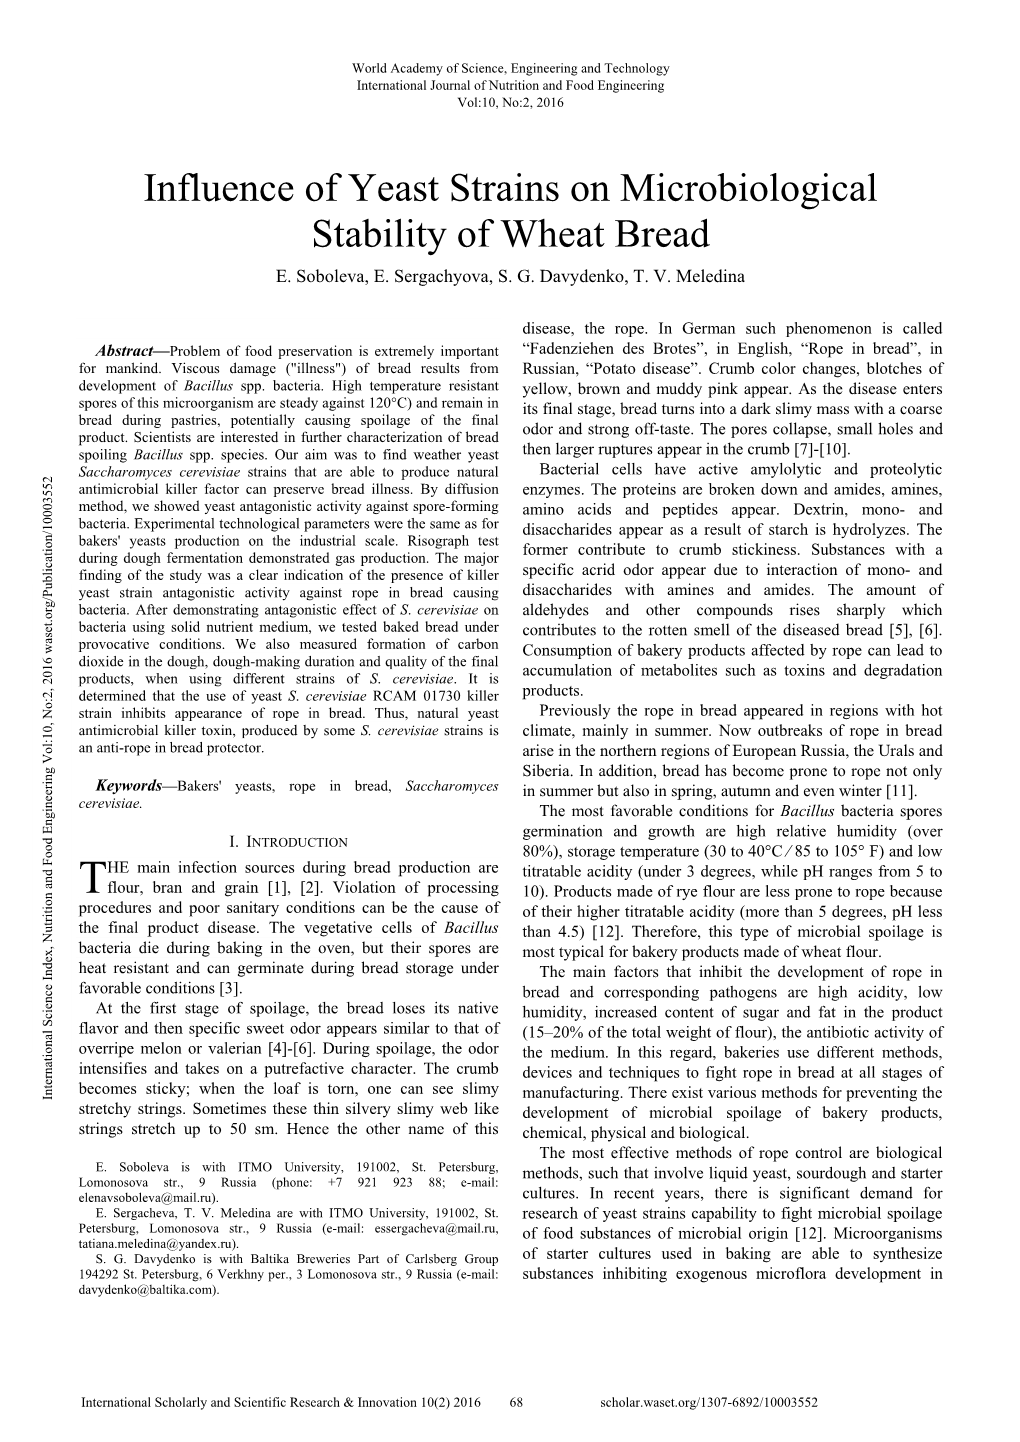 Influence of Yeast Strains on Microbiological Stability of Wheat Bread E